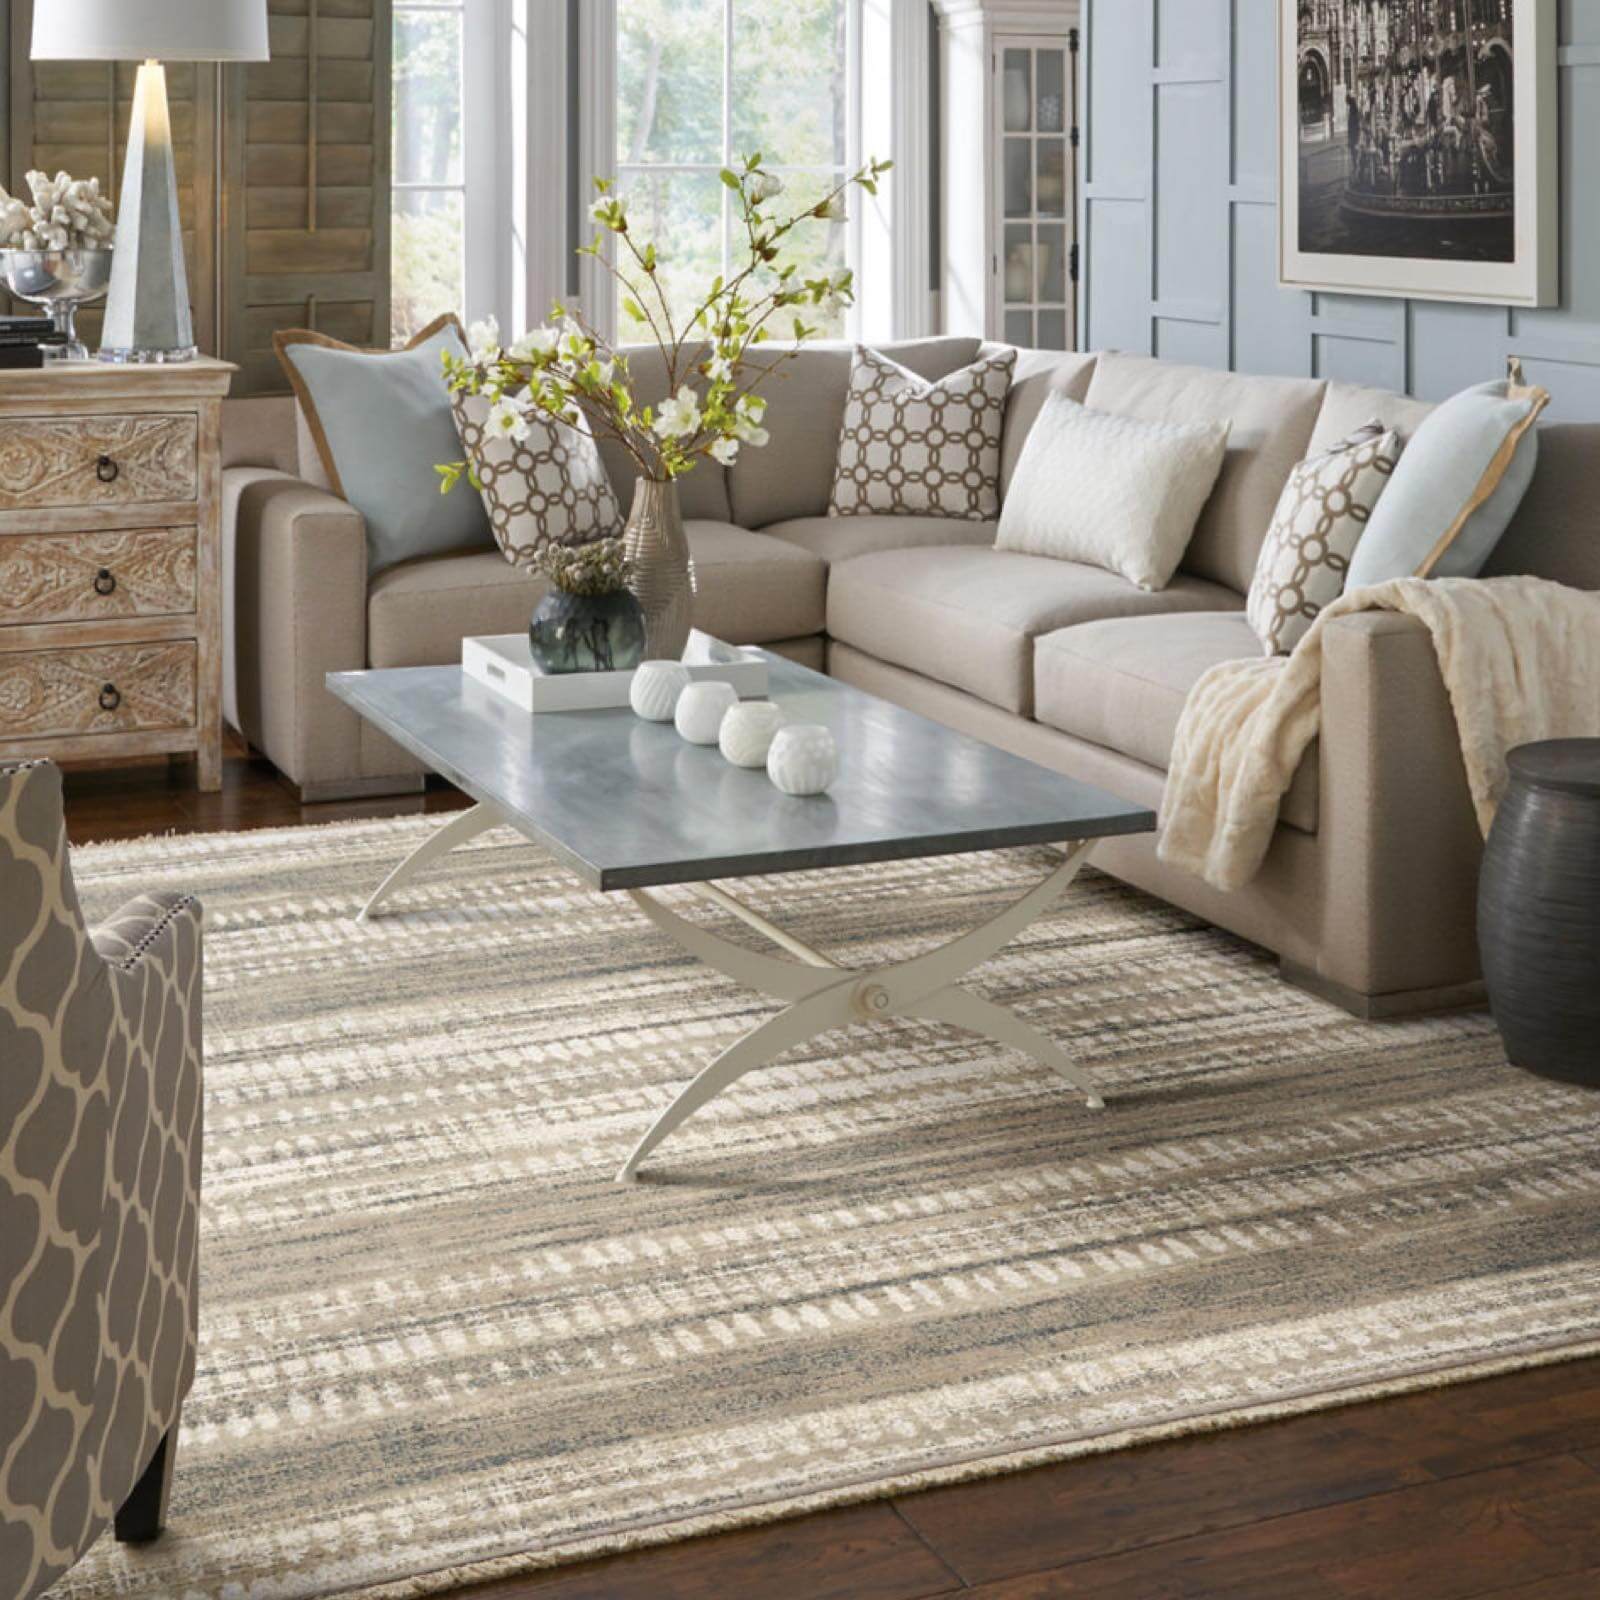 Area Rug for living room | Carpet Selections | Prospect and Louisville, KY